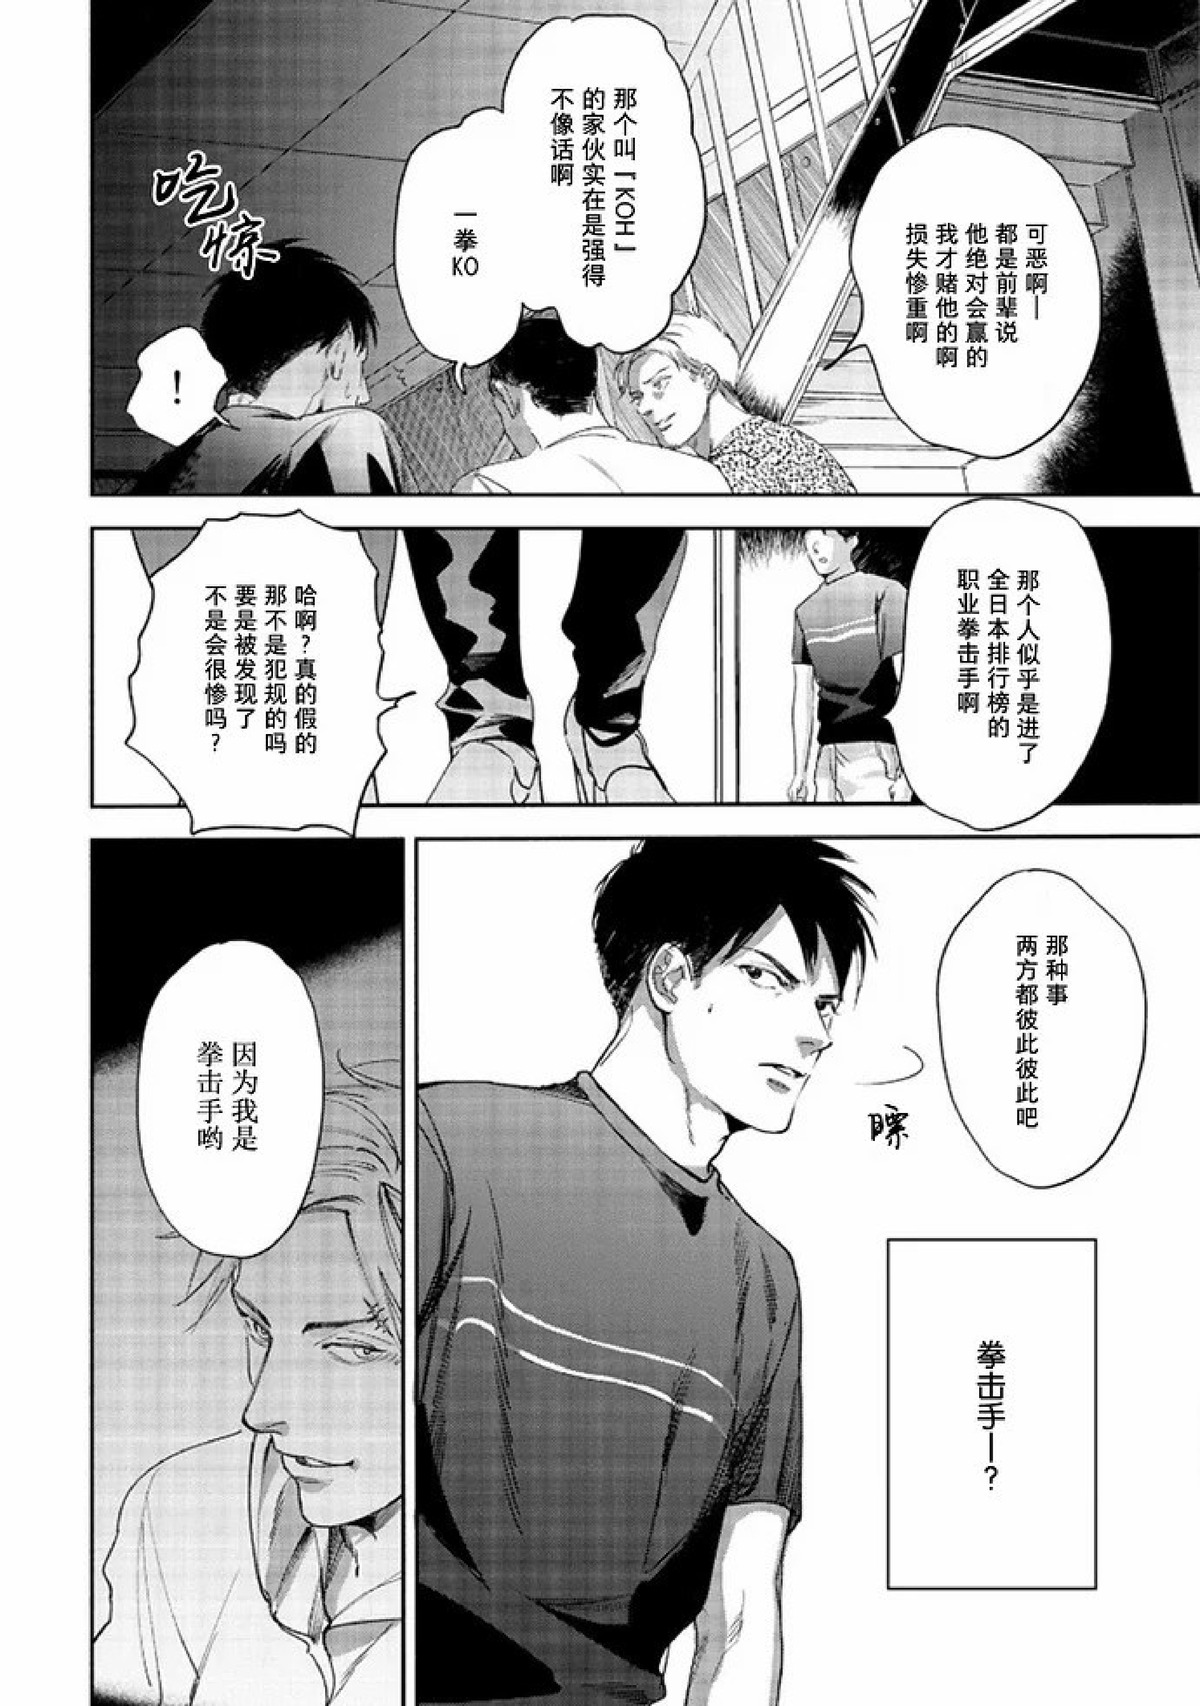 【Two sides of the same coin[耽美]】漫画-（上卷01-02）章节漫画下拉式图片-50.jpg